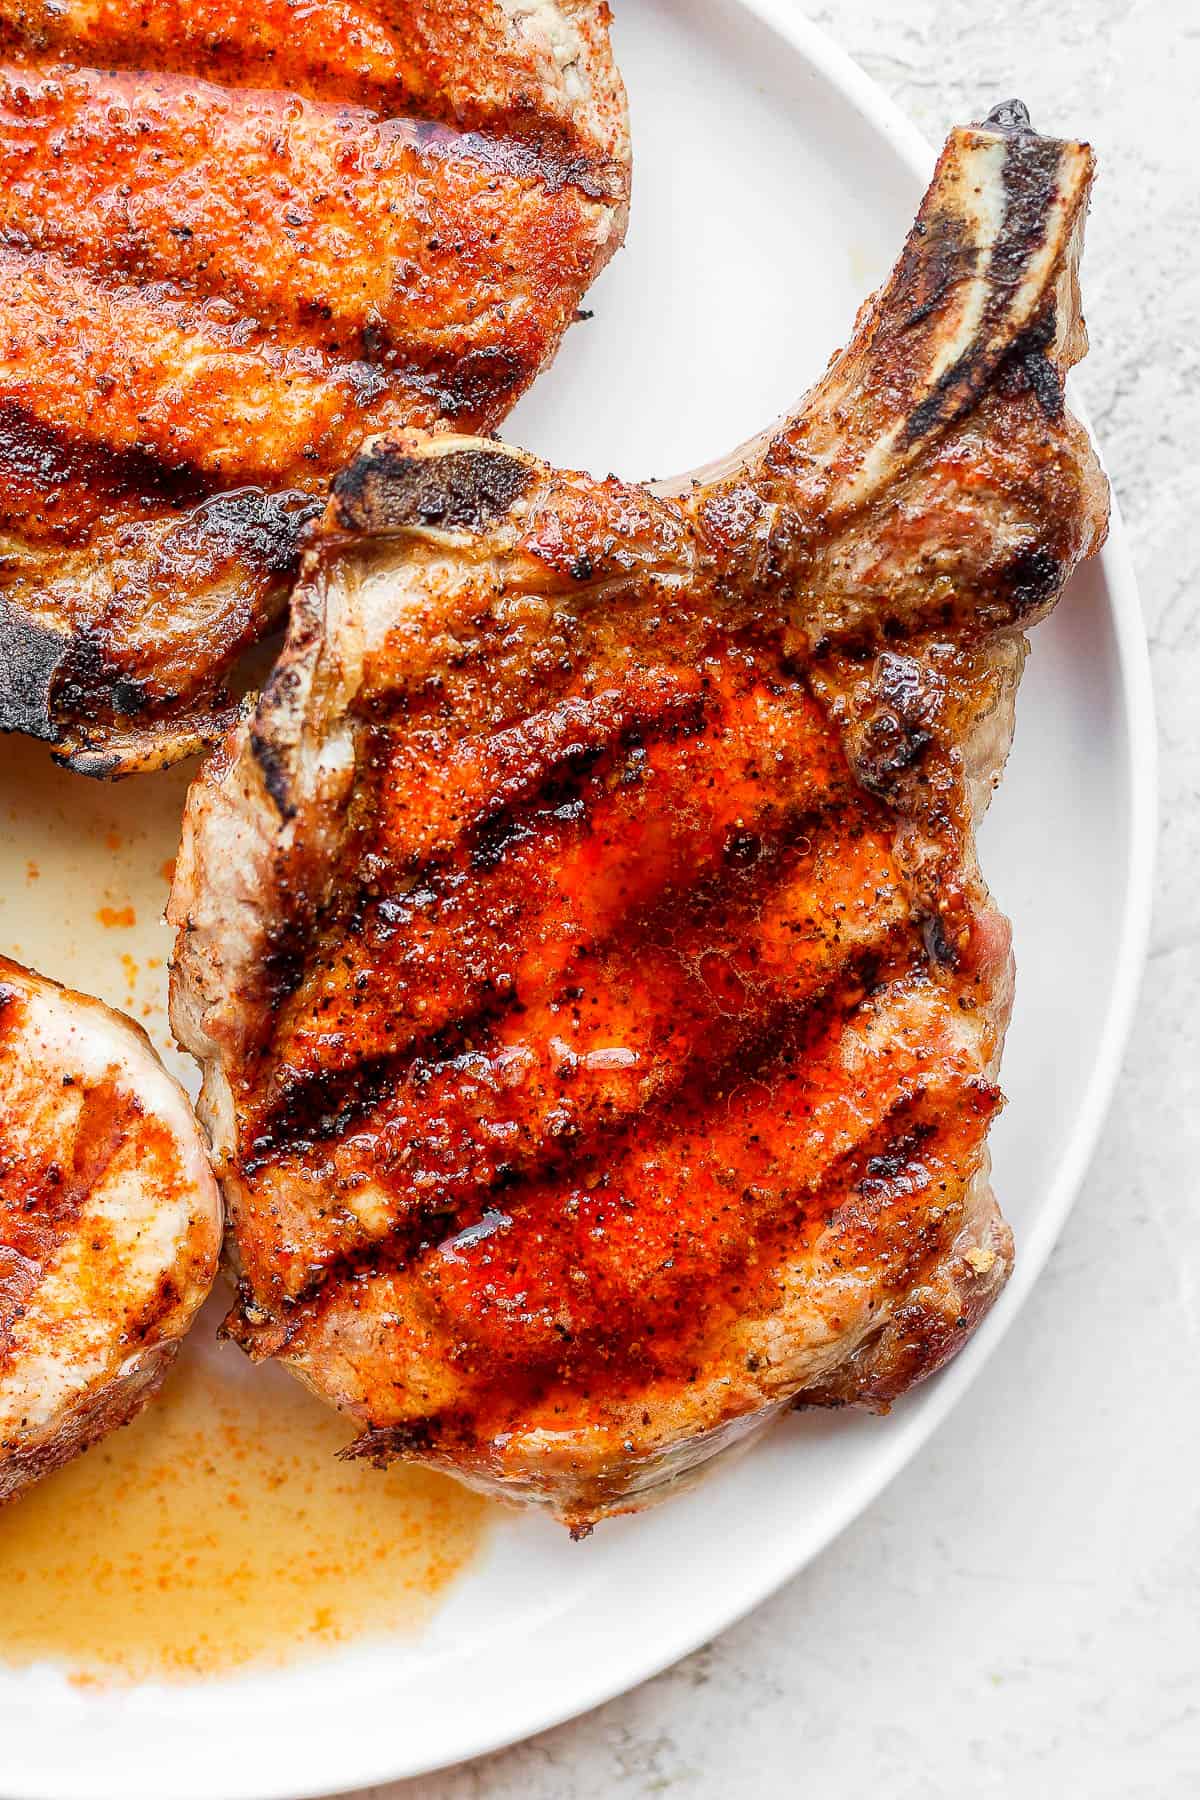 A plate of 3 grilled pork chops. 